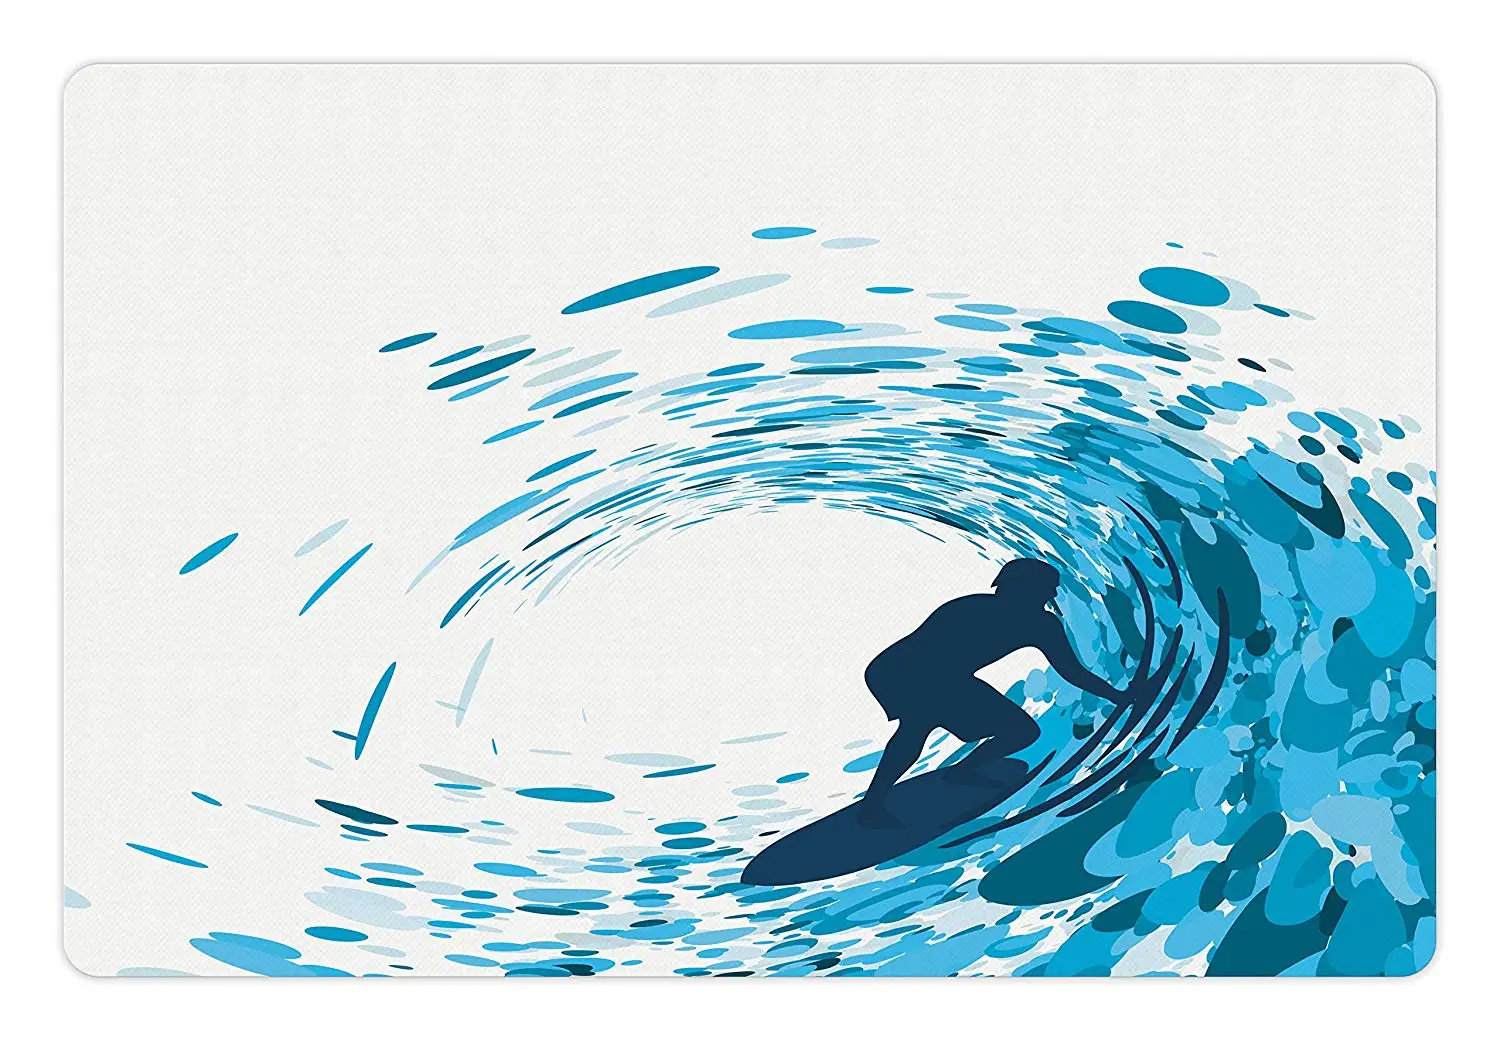 XHFITCLtd Ride The Wave Tapestry, Silhouette of a Surfer under Giant Ocean Waves...